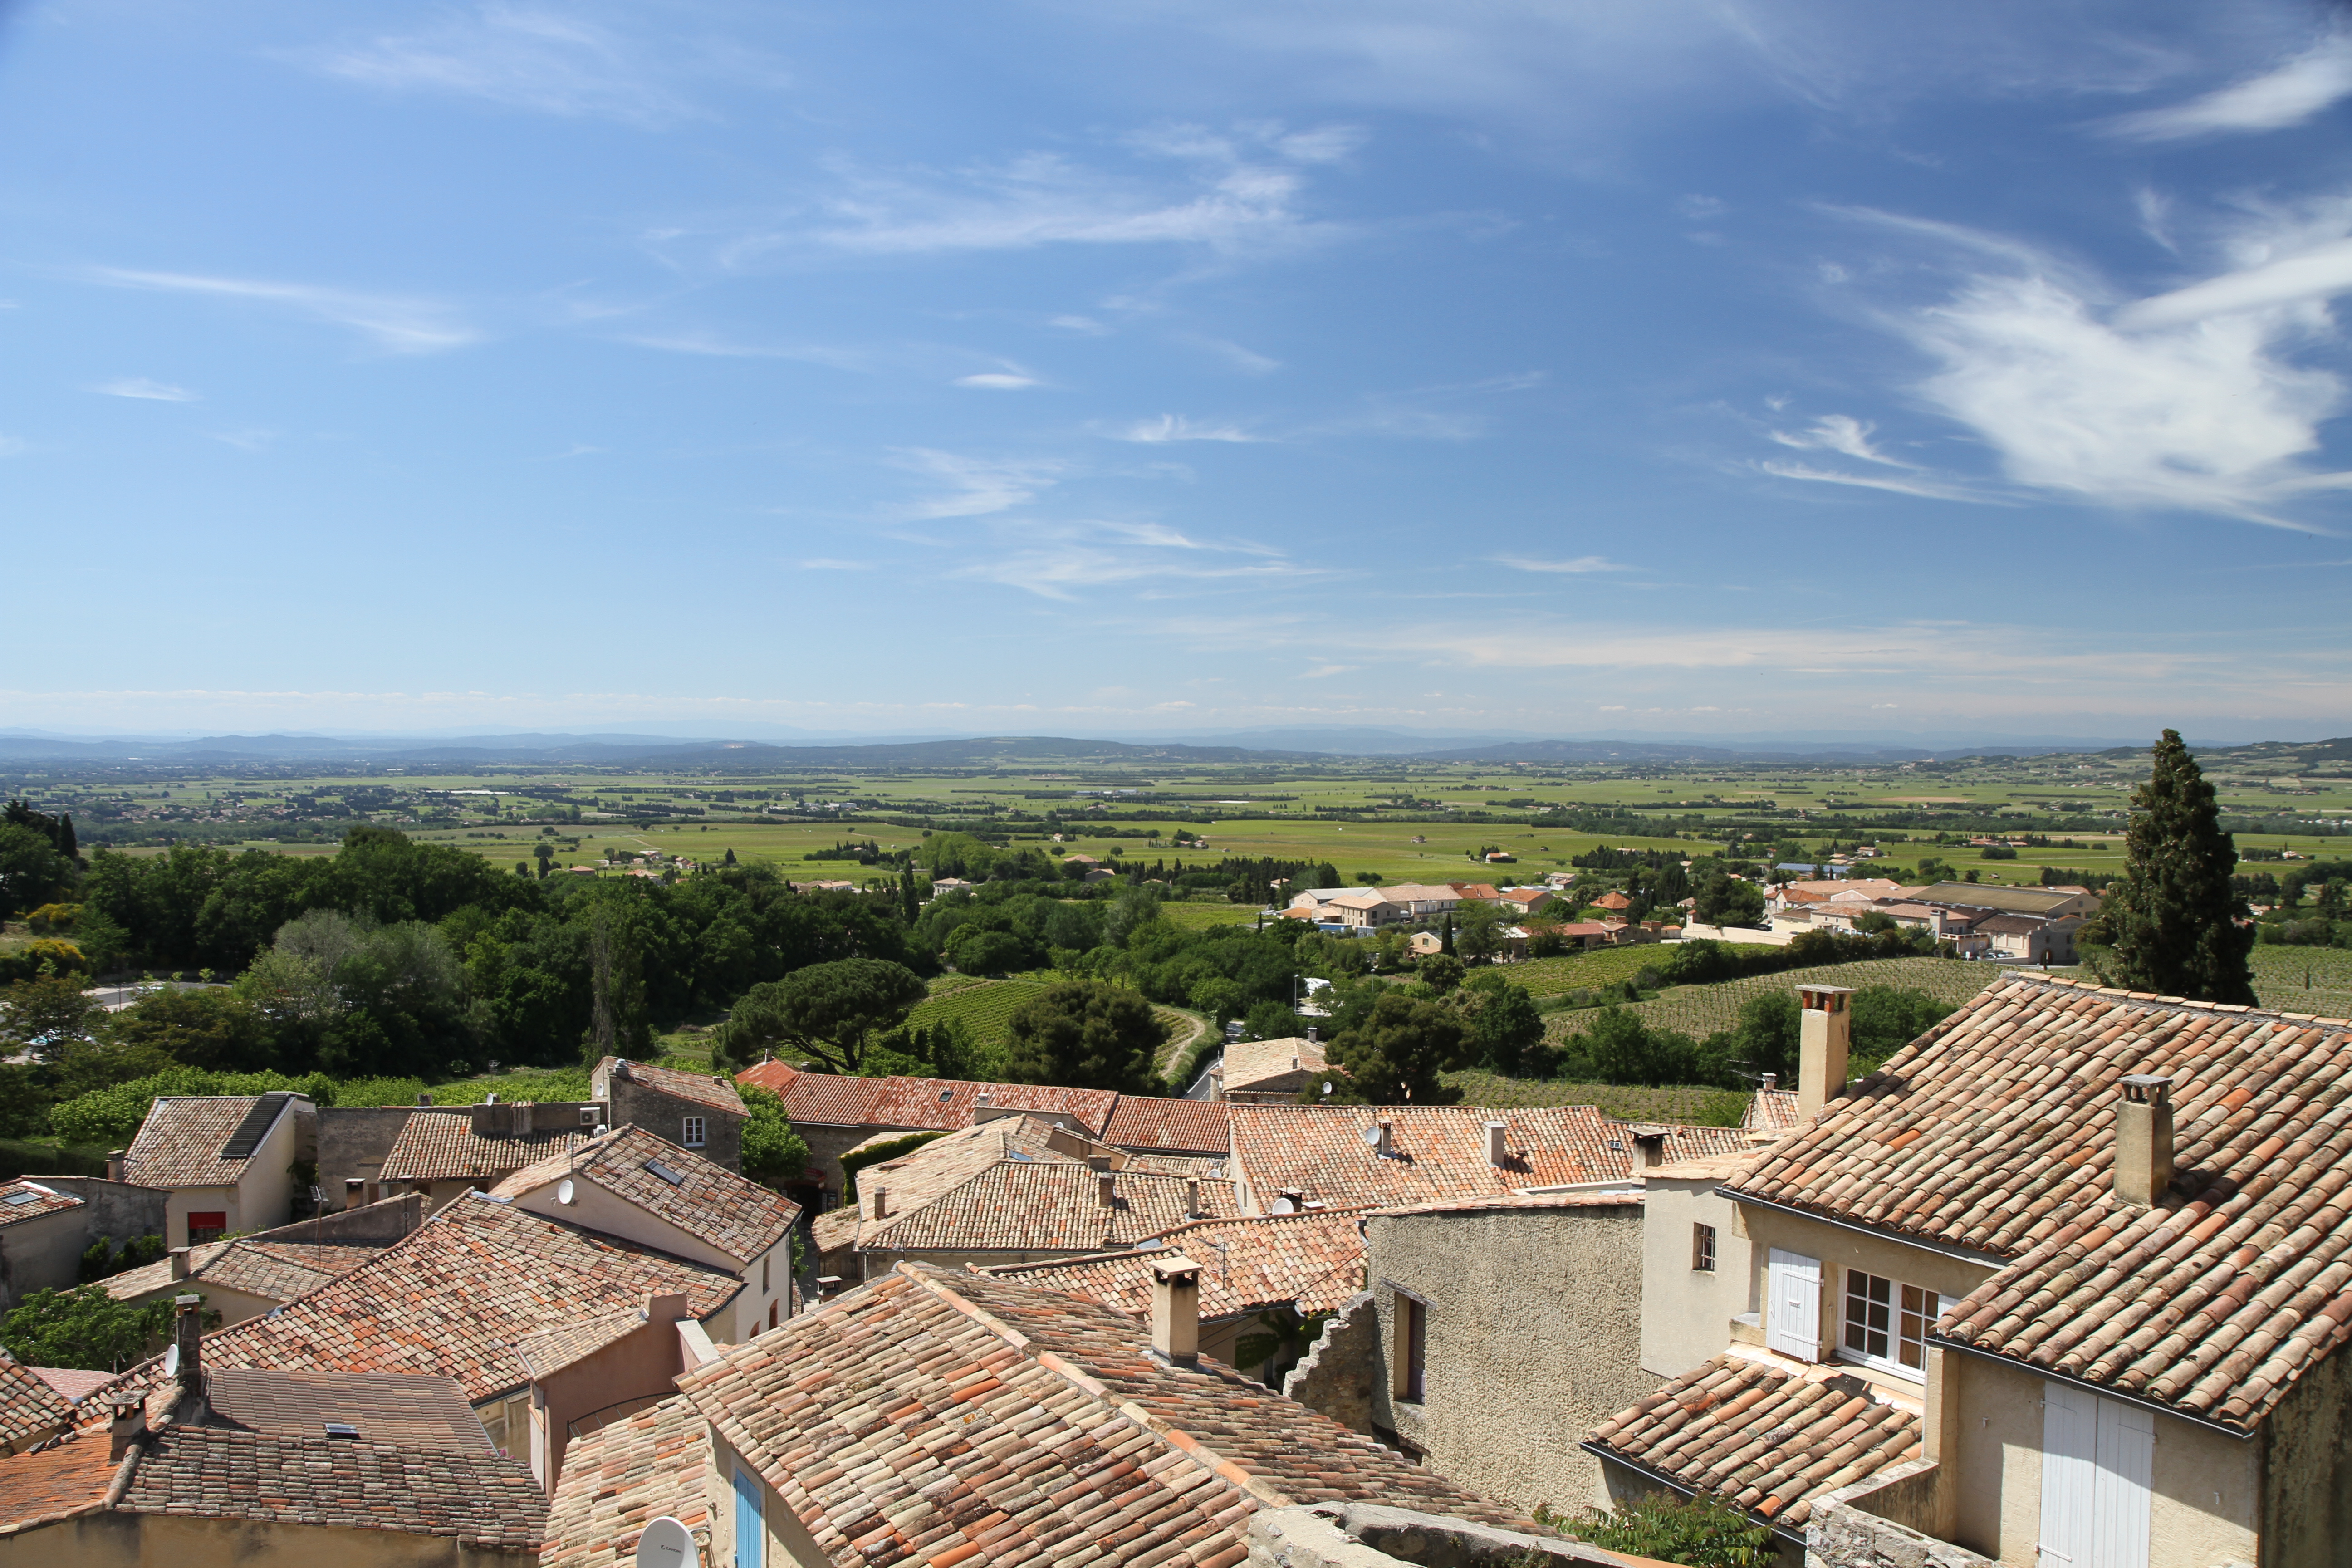 Nice view from the hilltop in Gigondas, by the main church